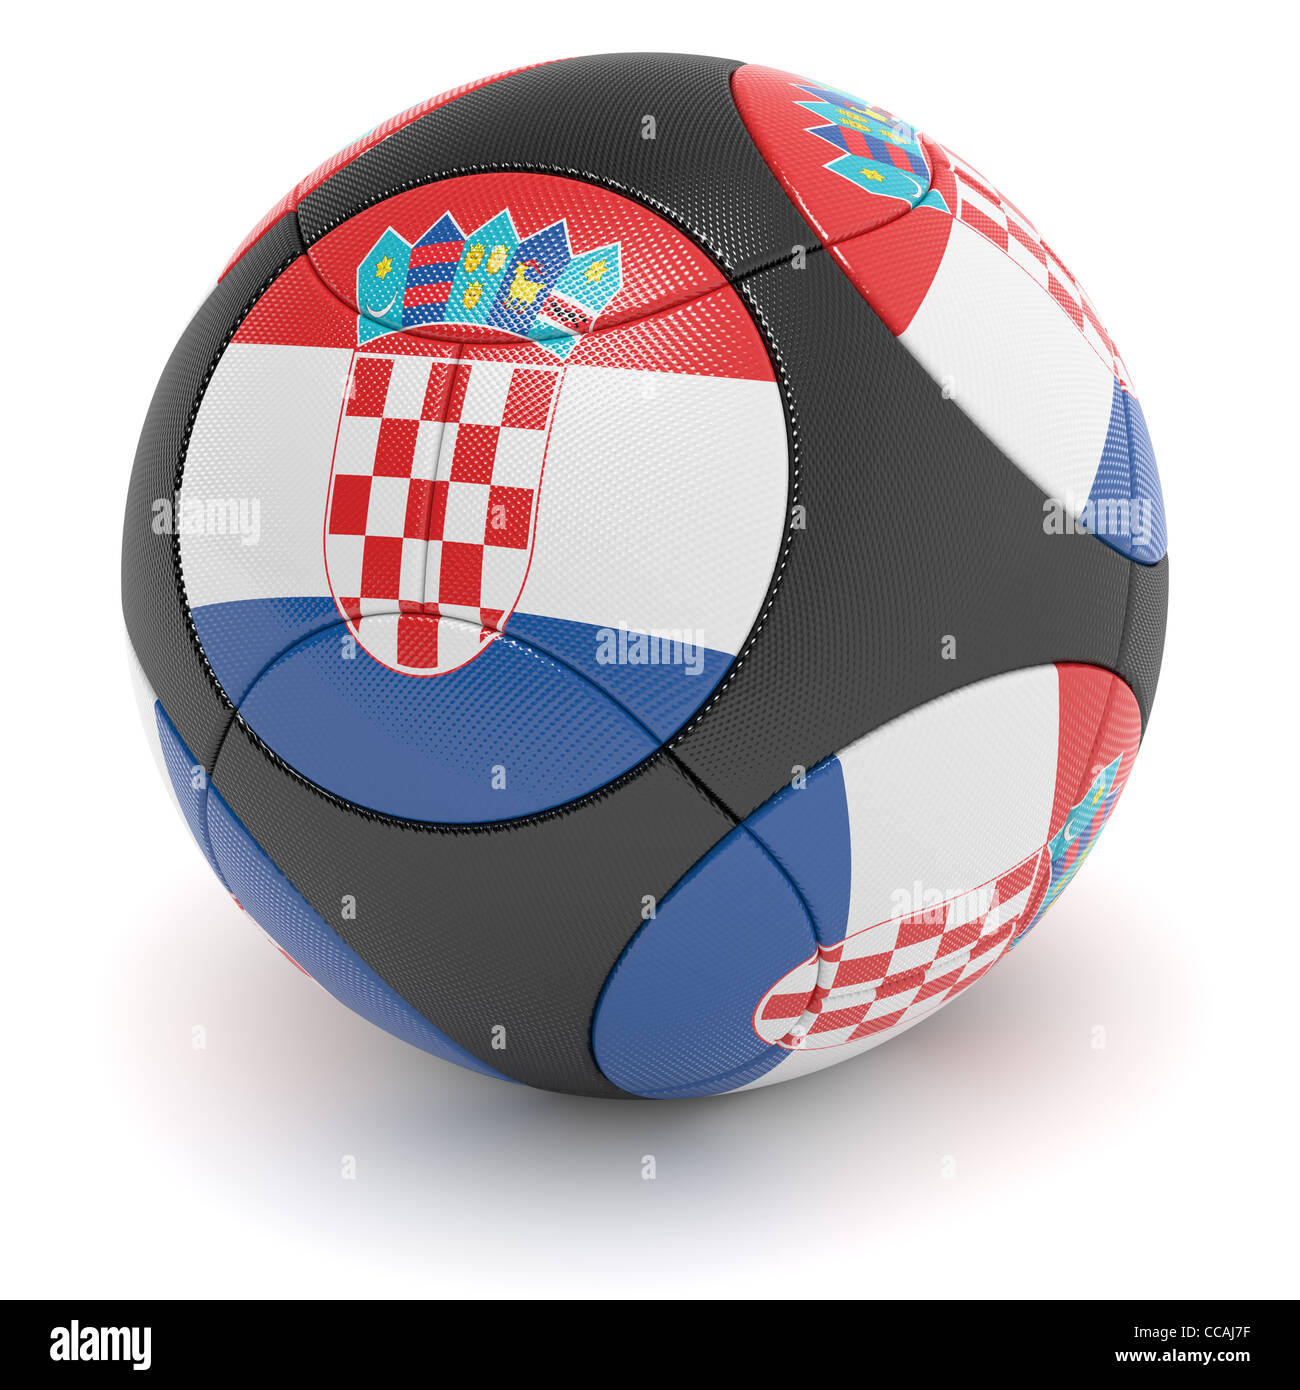 Soccer match ball of the 2012 European Championship with the flag of Croatia - clipping path included Stock Photo